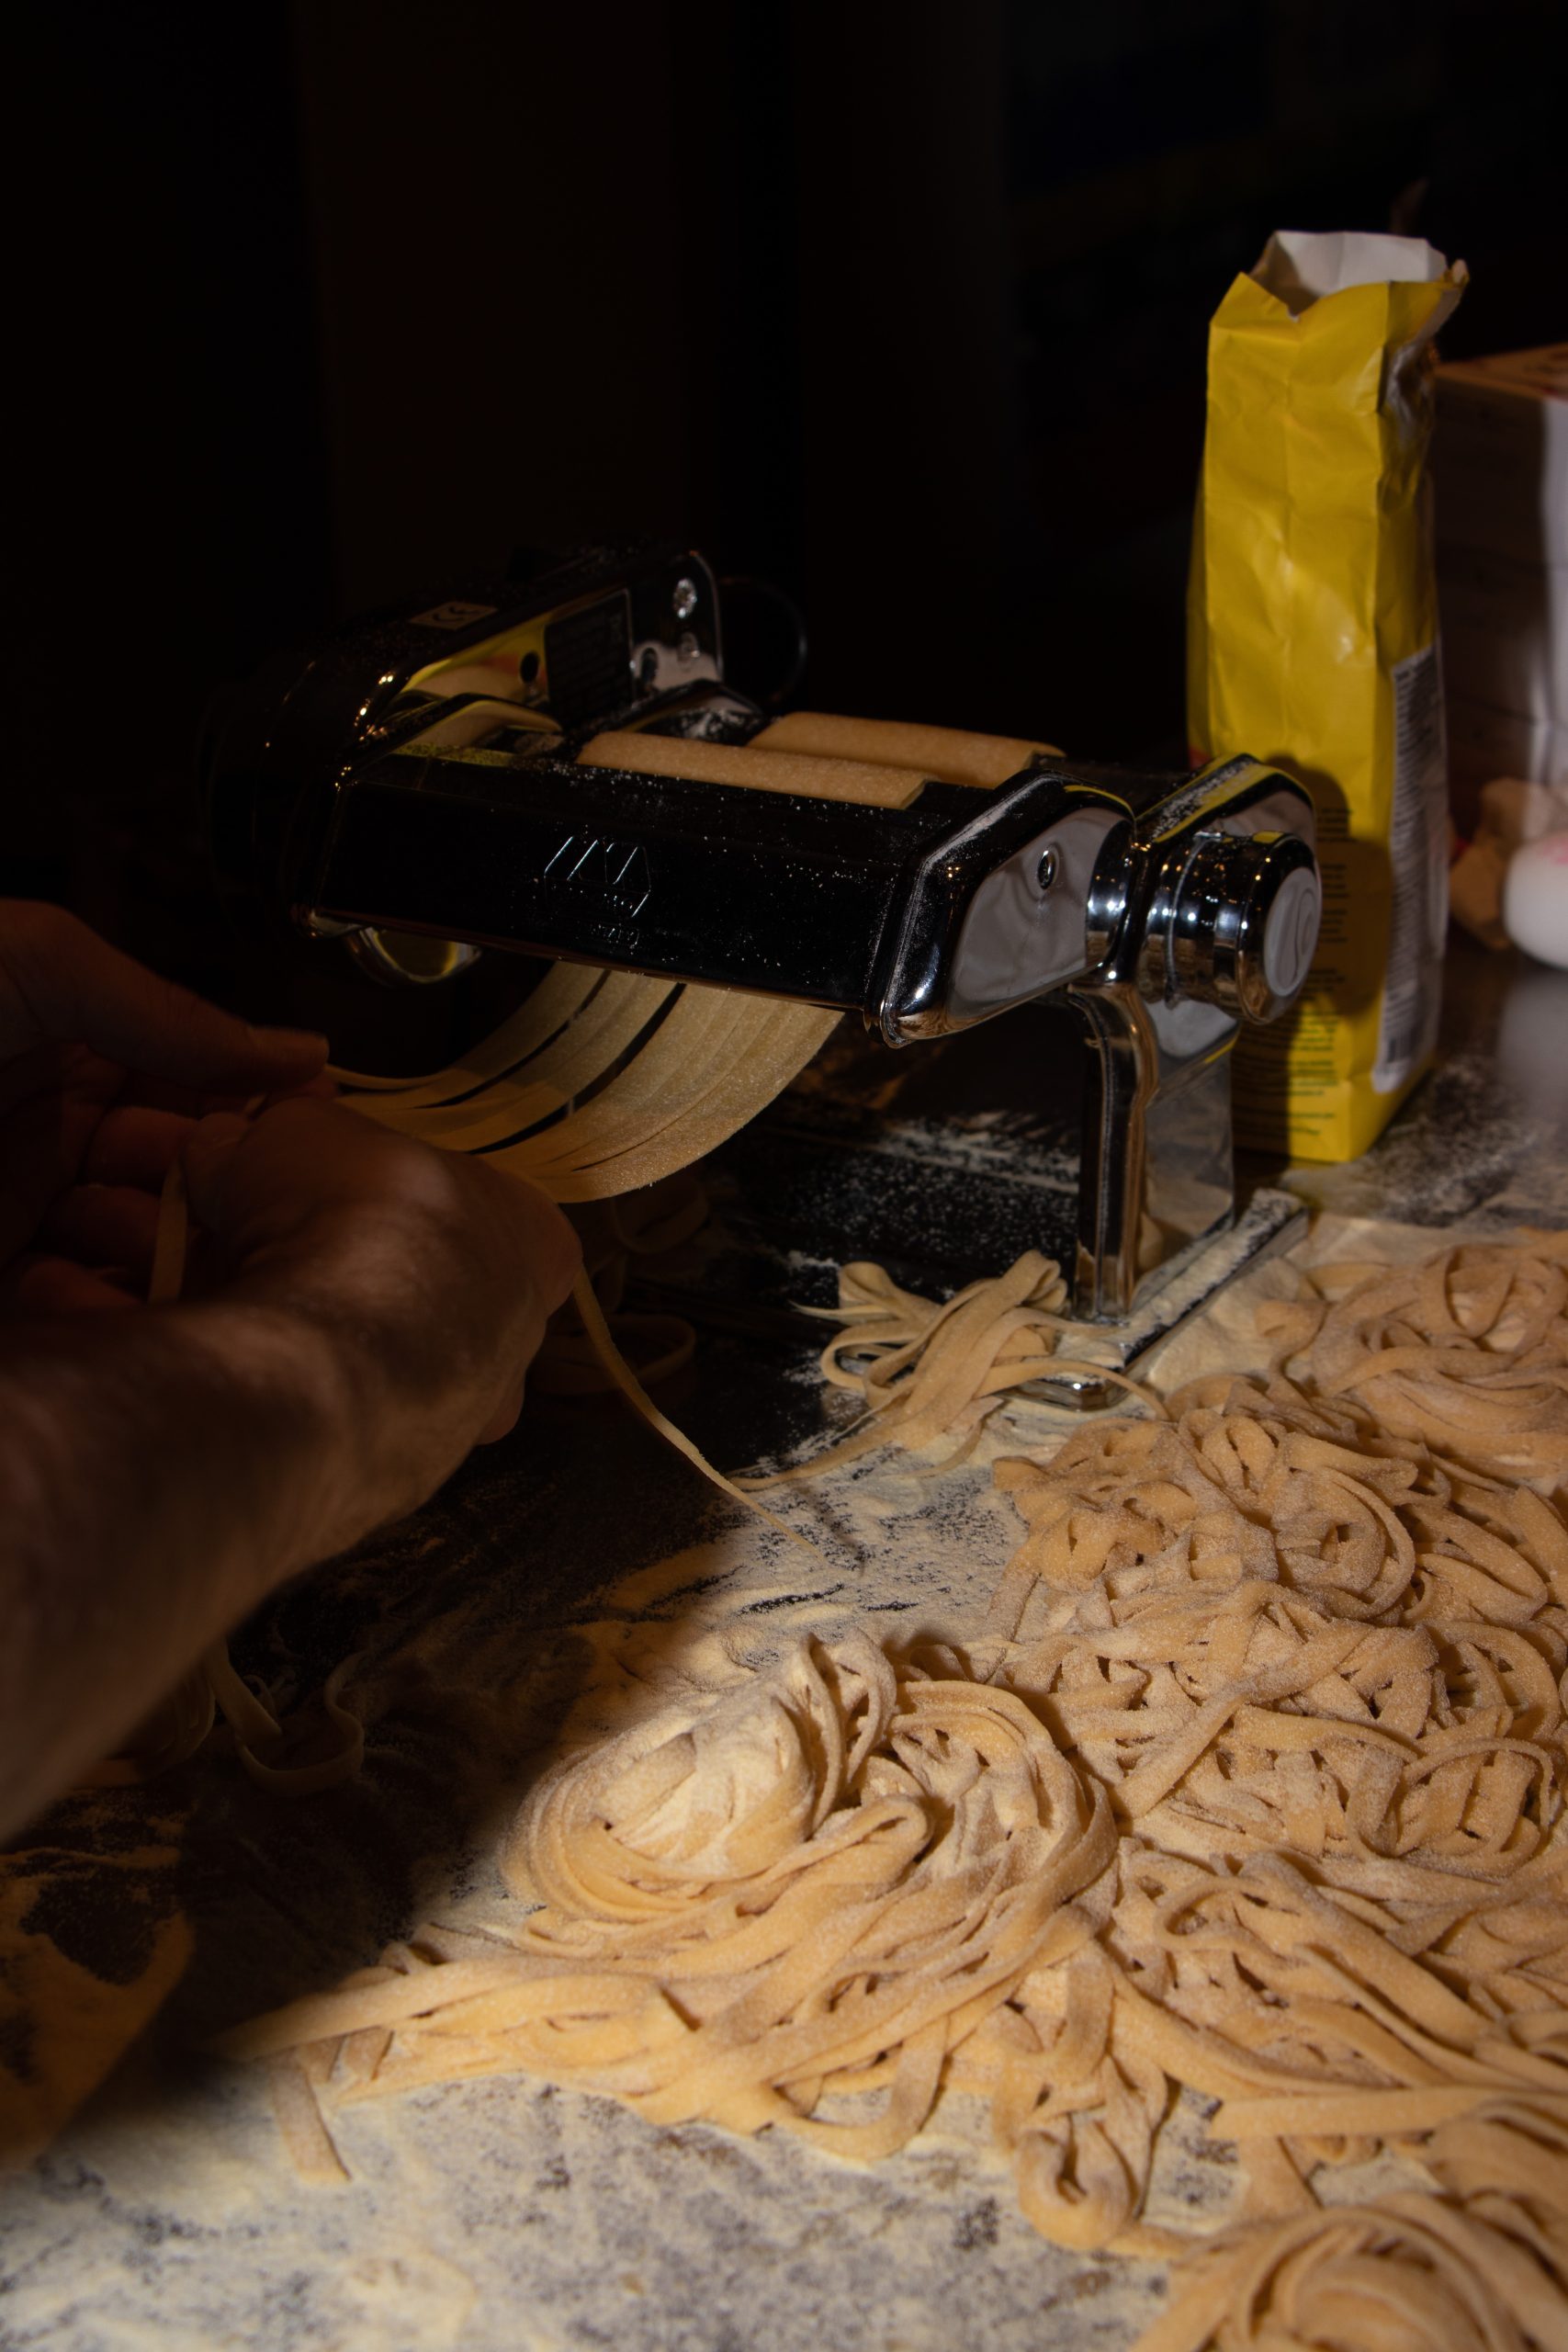 Visit a cereal farm near Paris and make your own pasta with fresh semolina